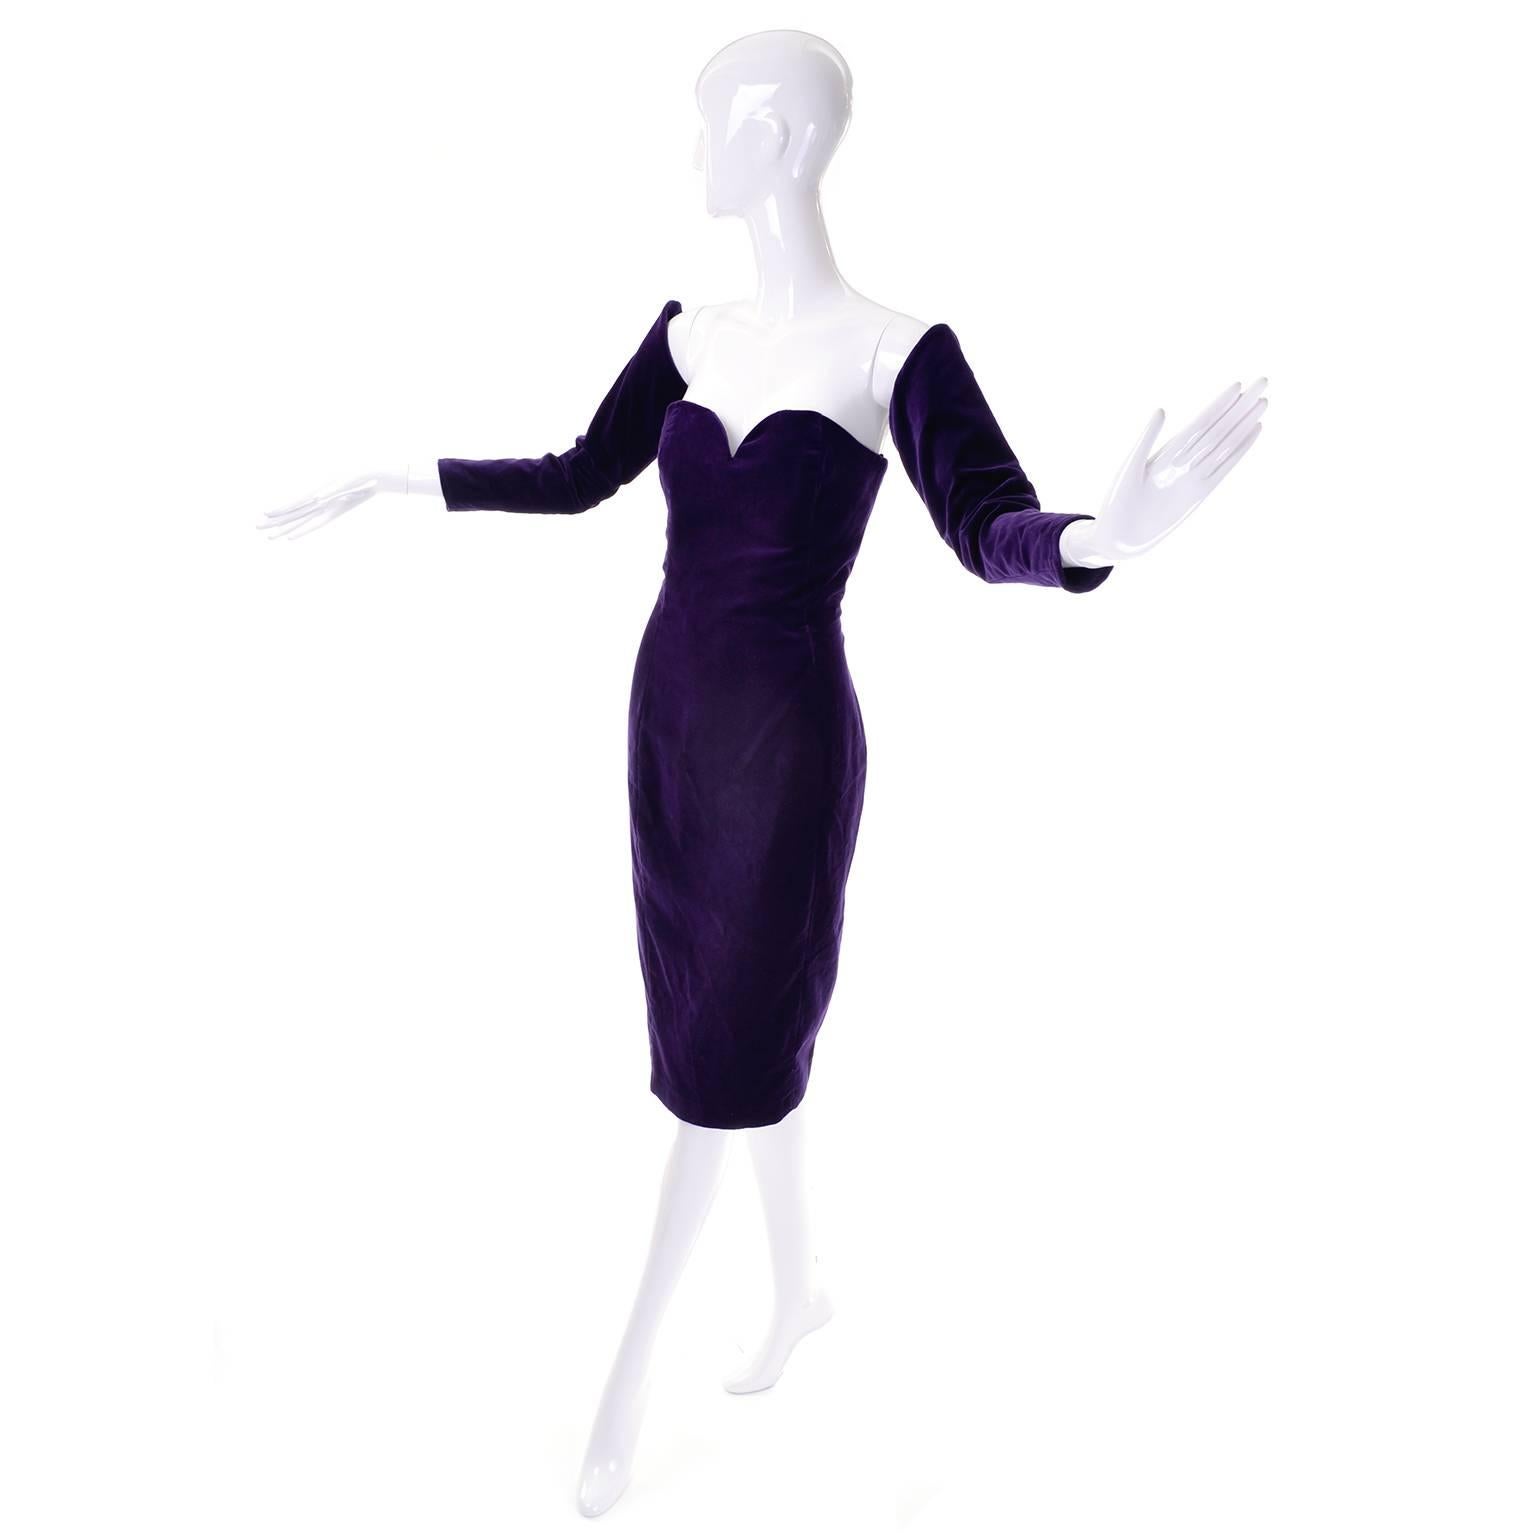 This is an absolutely stunning vintage dress from William Travilla from the 1980's!  We are fortunate to have had another one of these dresses that we sold a while back, that doesn't happen very often!  This incredible strapless purple velvet dress